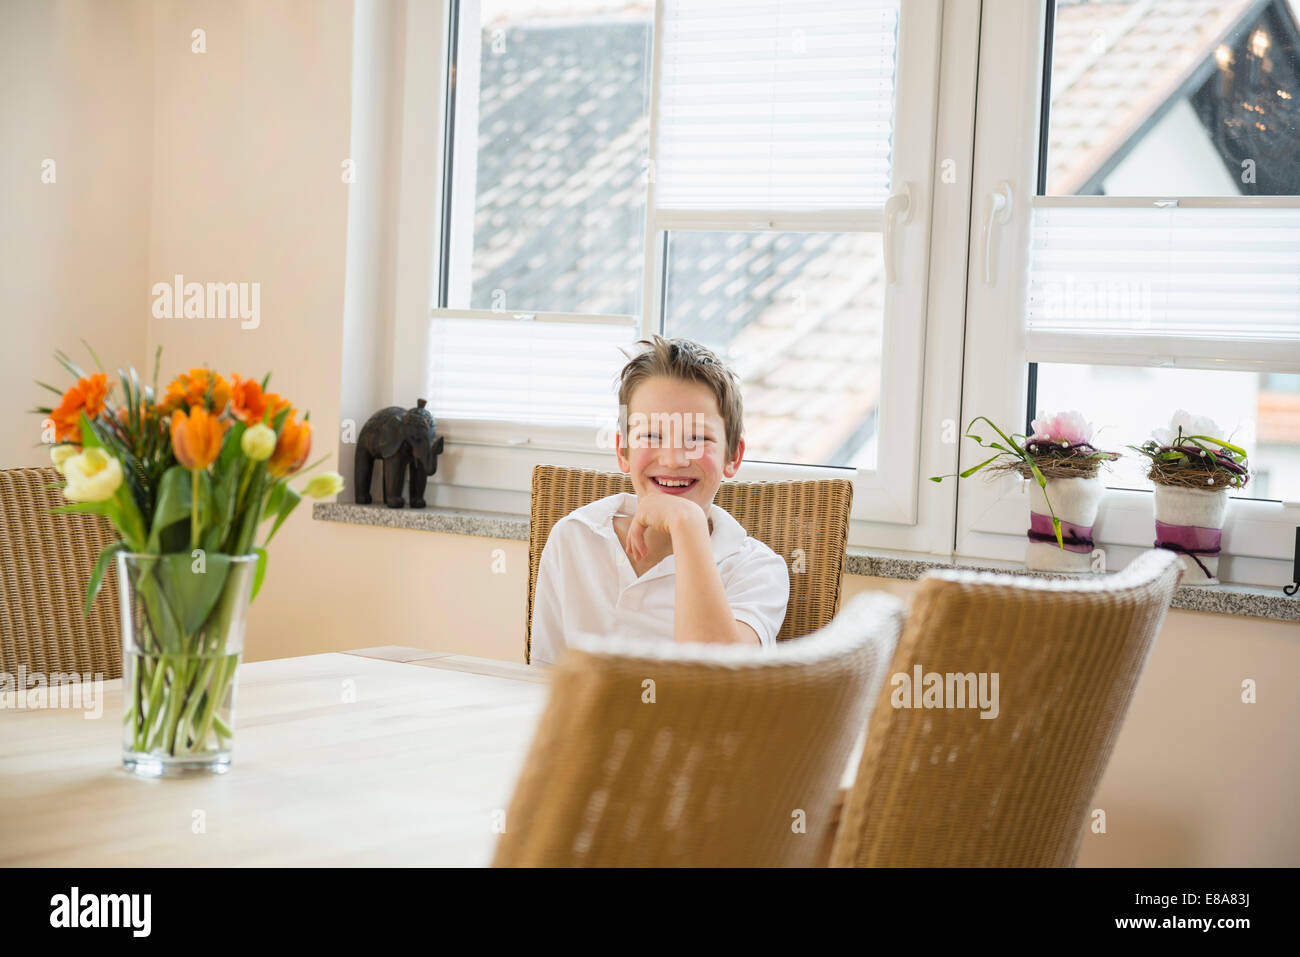 Portrait of smiling boy sitting at table Banque D'Images